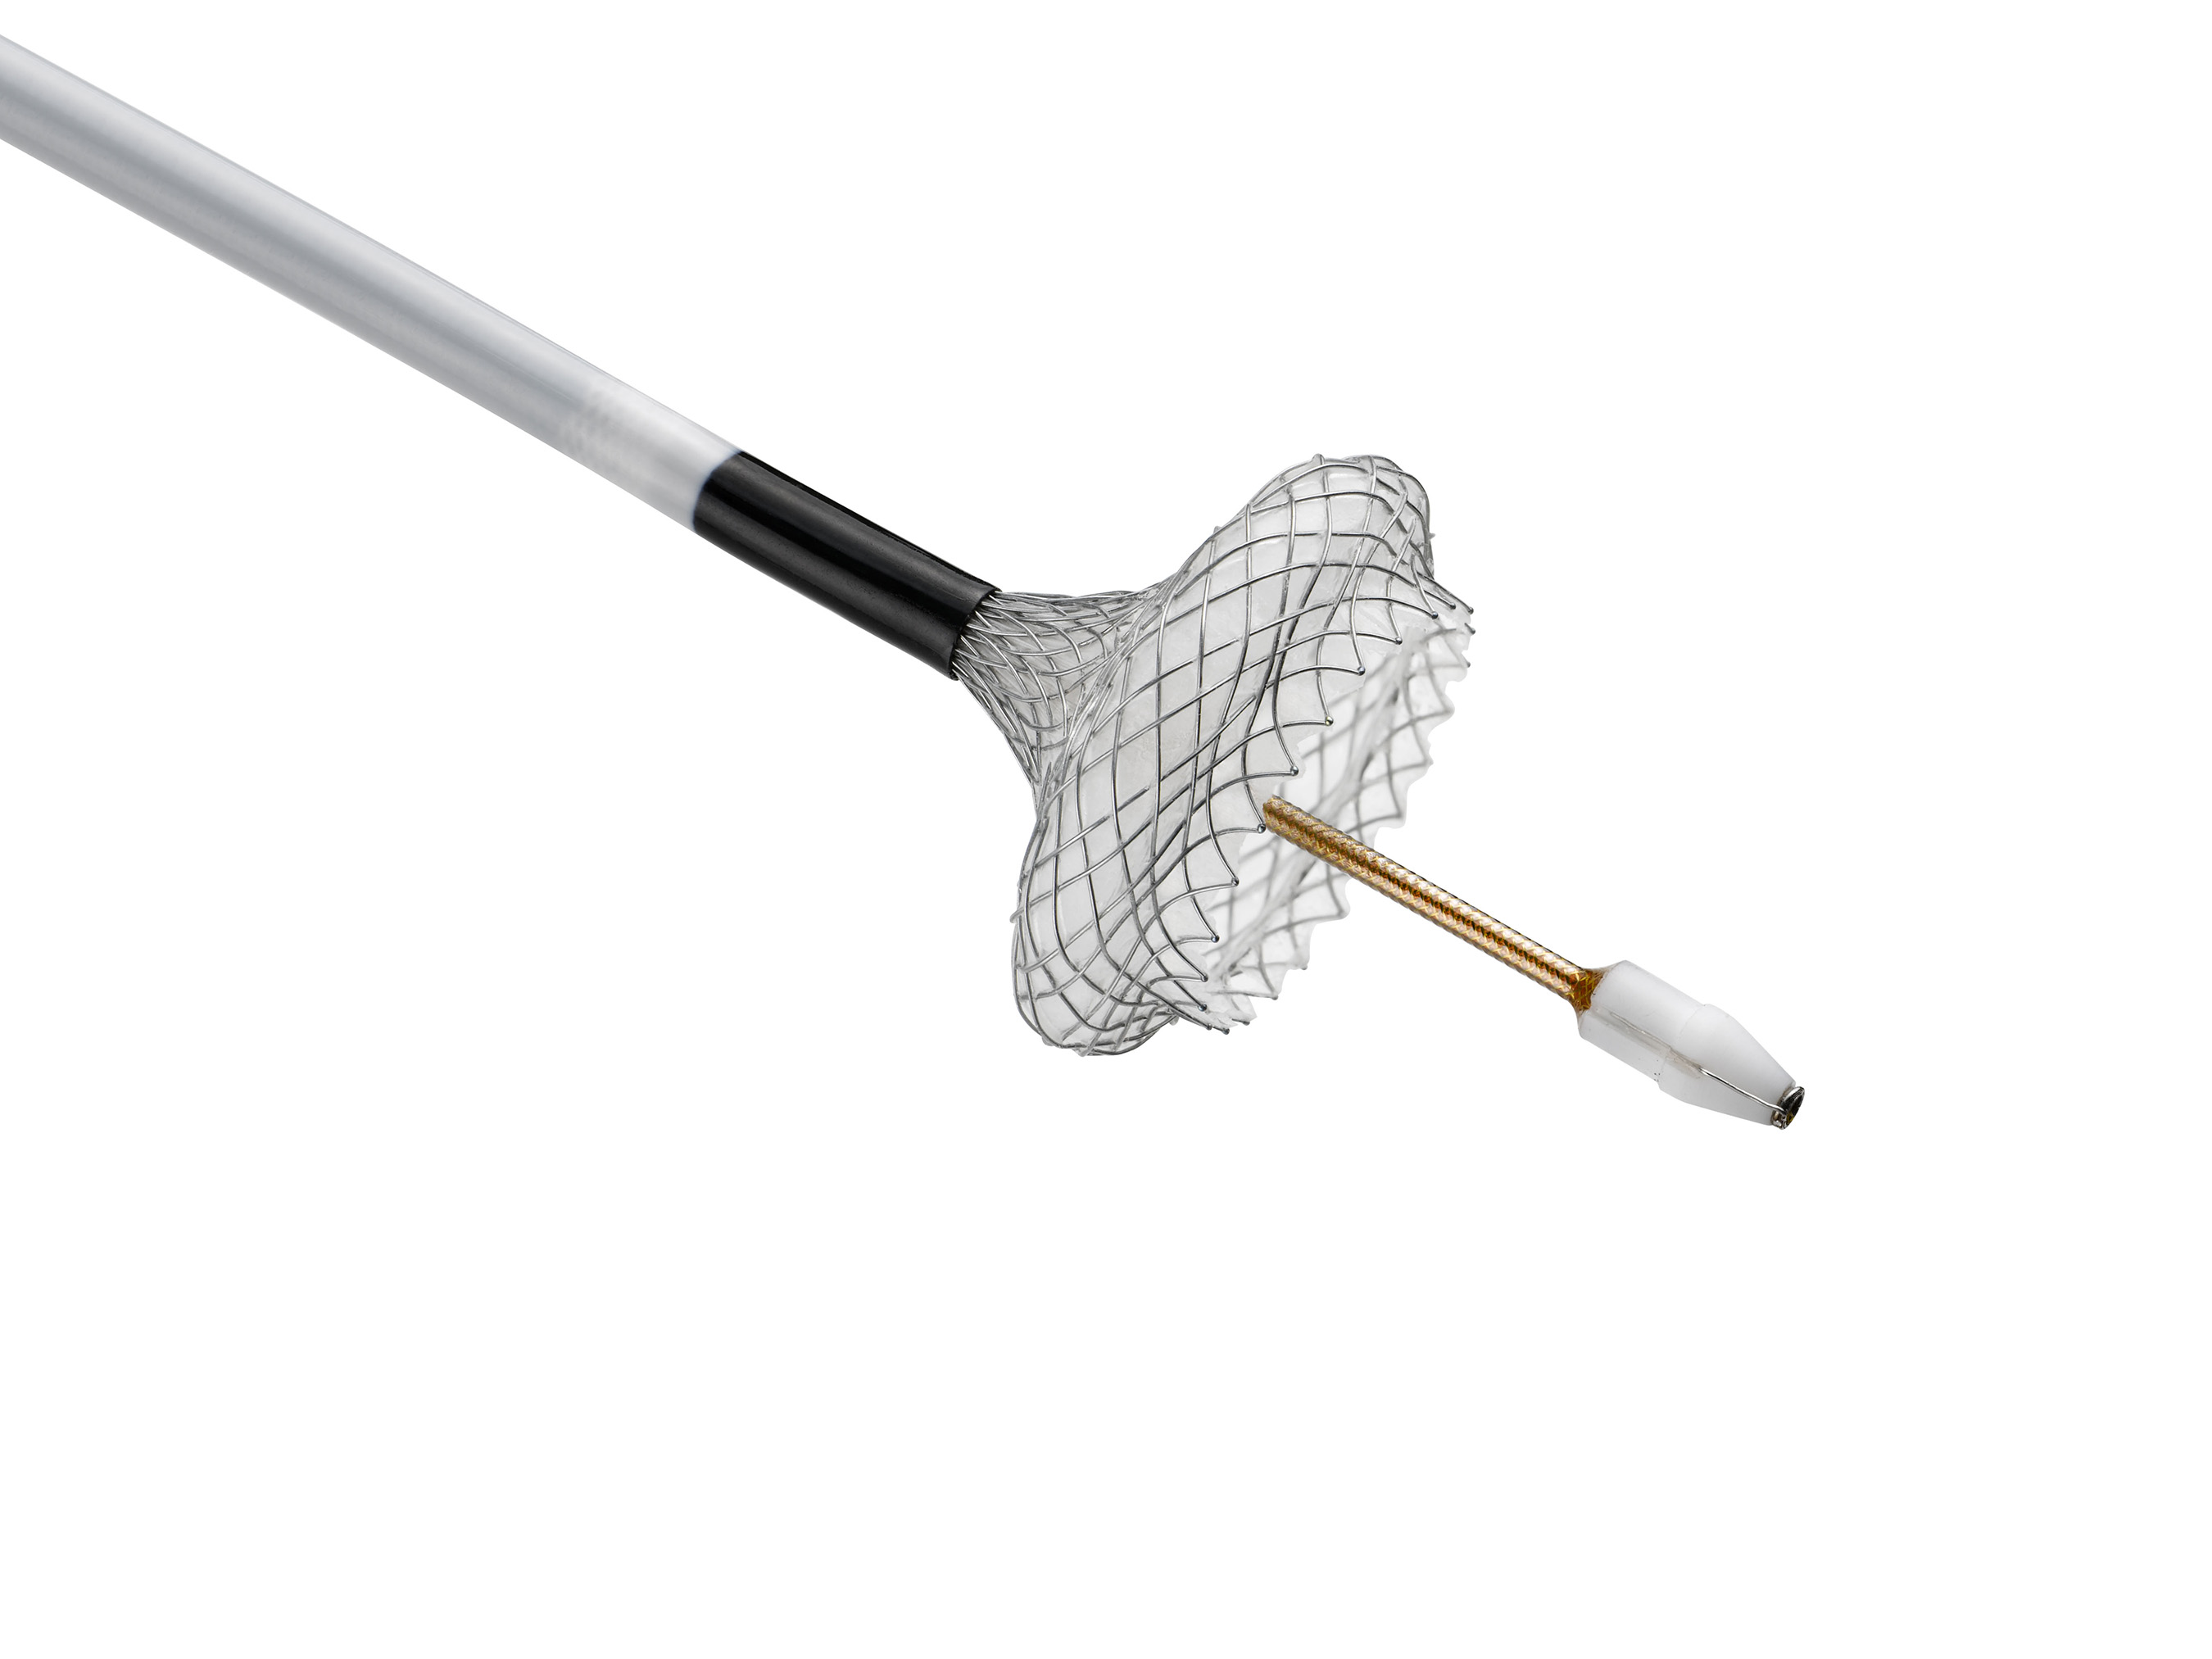 The AXIOS™ System combines a cautery-enabled access catheter with the AXIOS stent